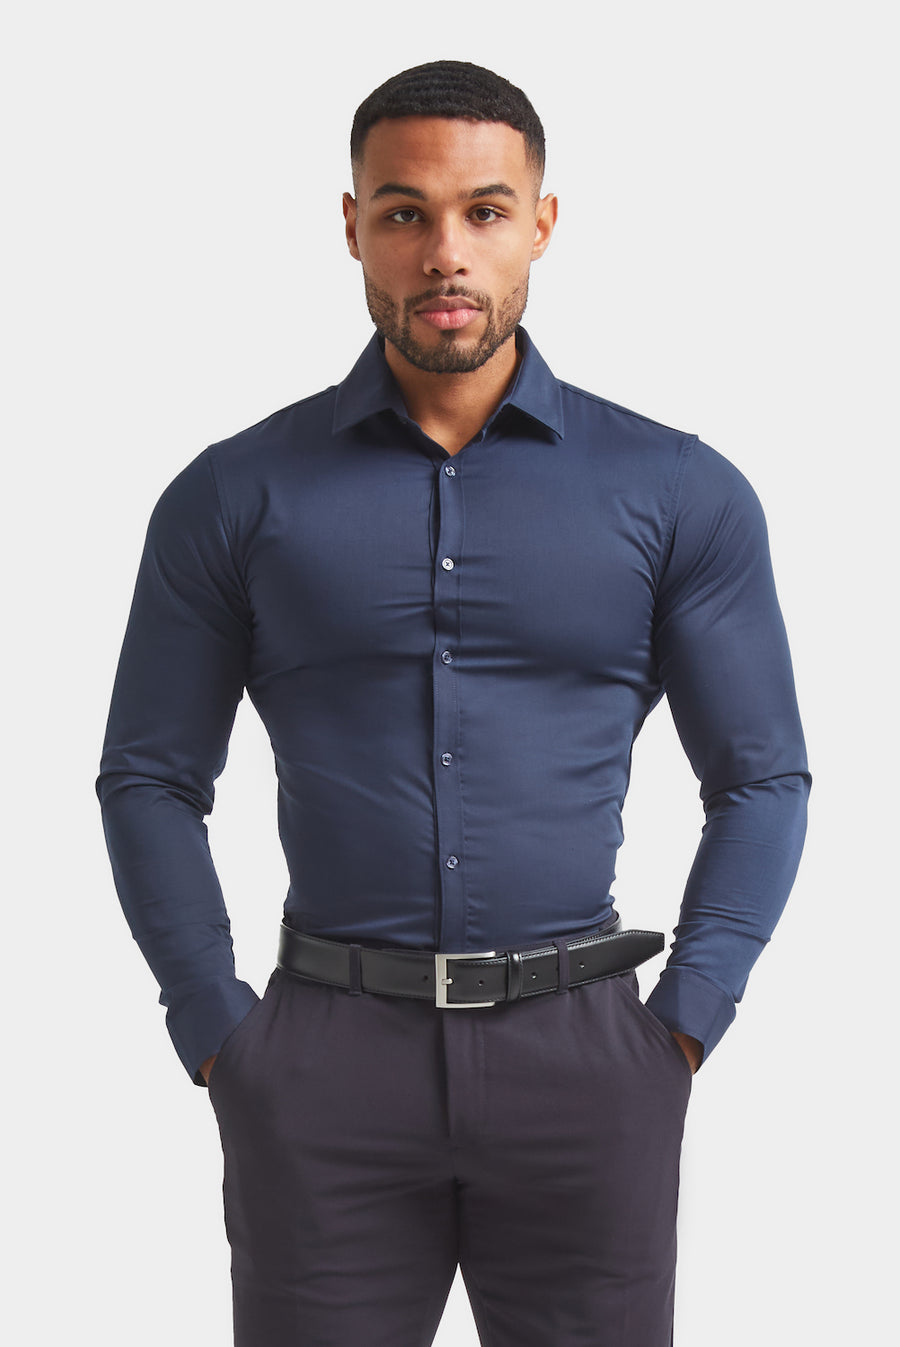 Muscle Fit Signature - 2.0 ATHLETE USA - Shirt Burgundy TAILORED in